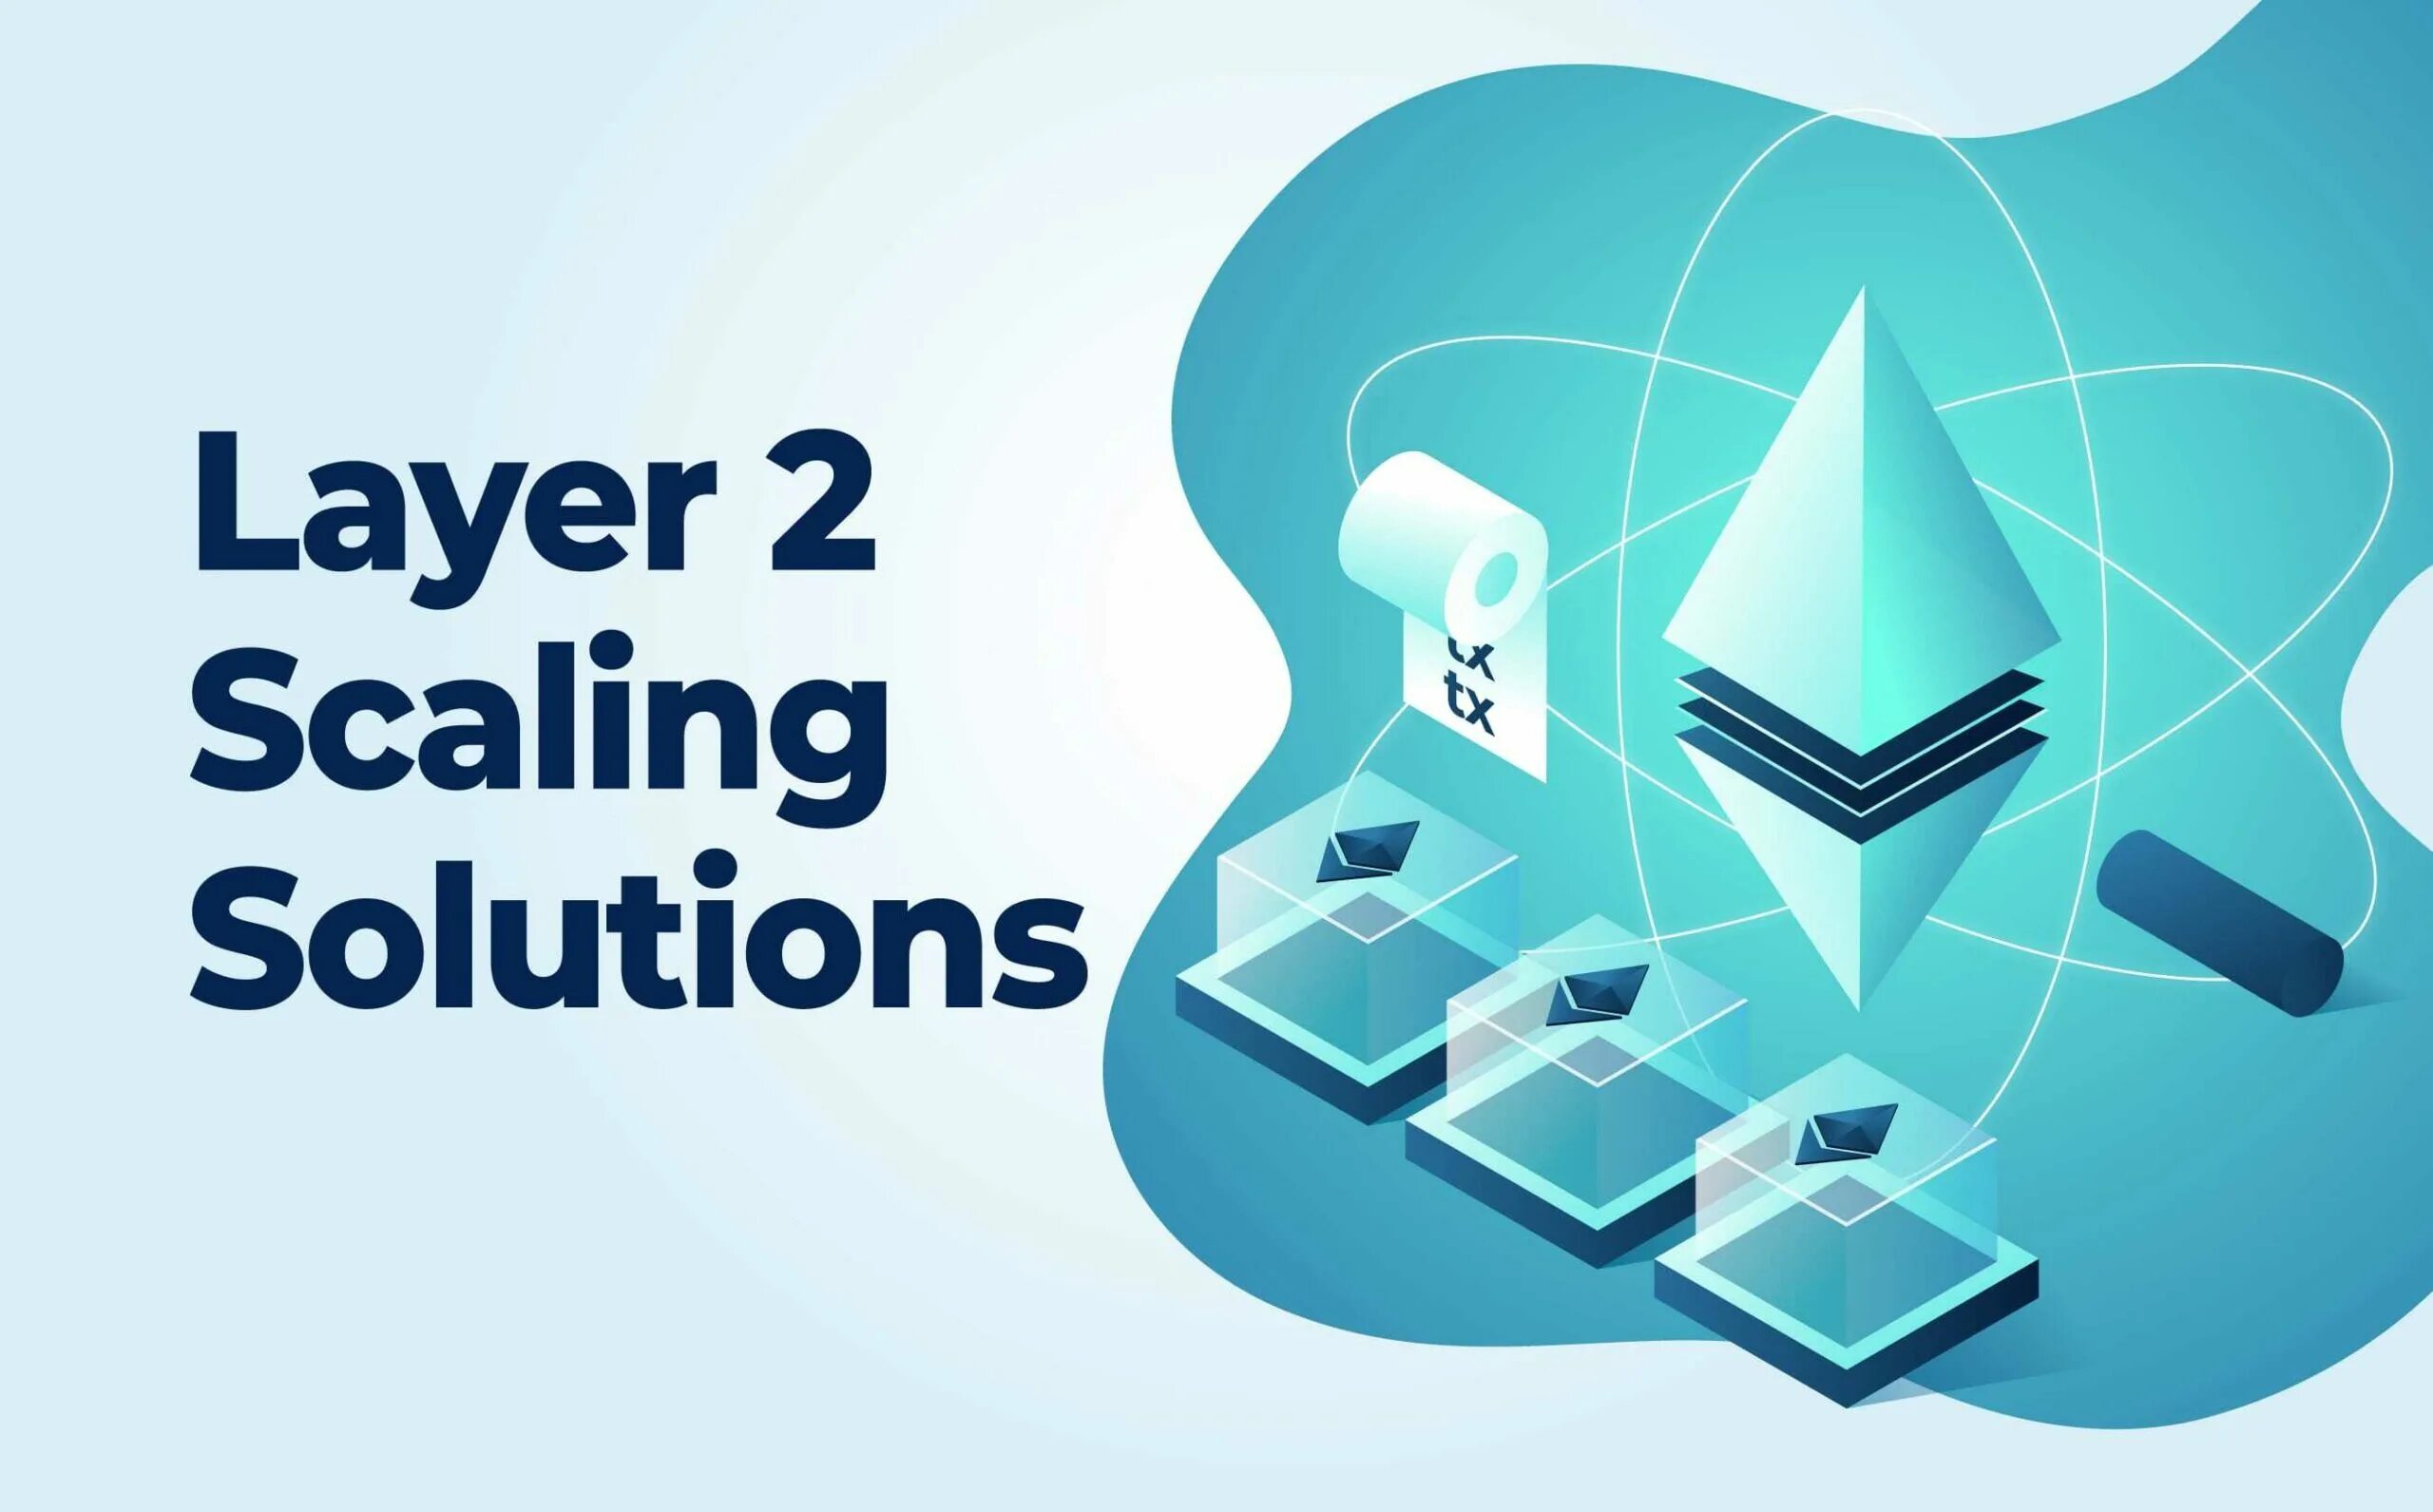 Layer 2 Ethereum. Scalable solutions. Bitcoin layer2. Blockchain layers. Two layer